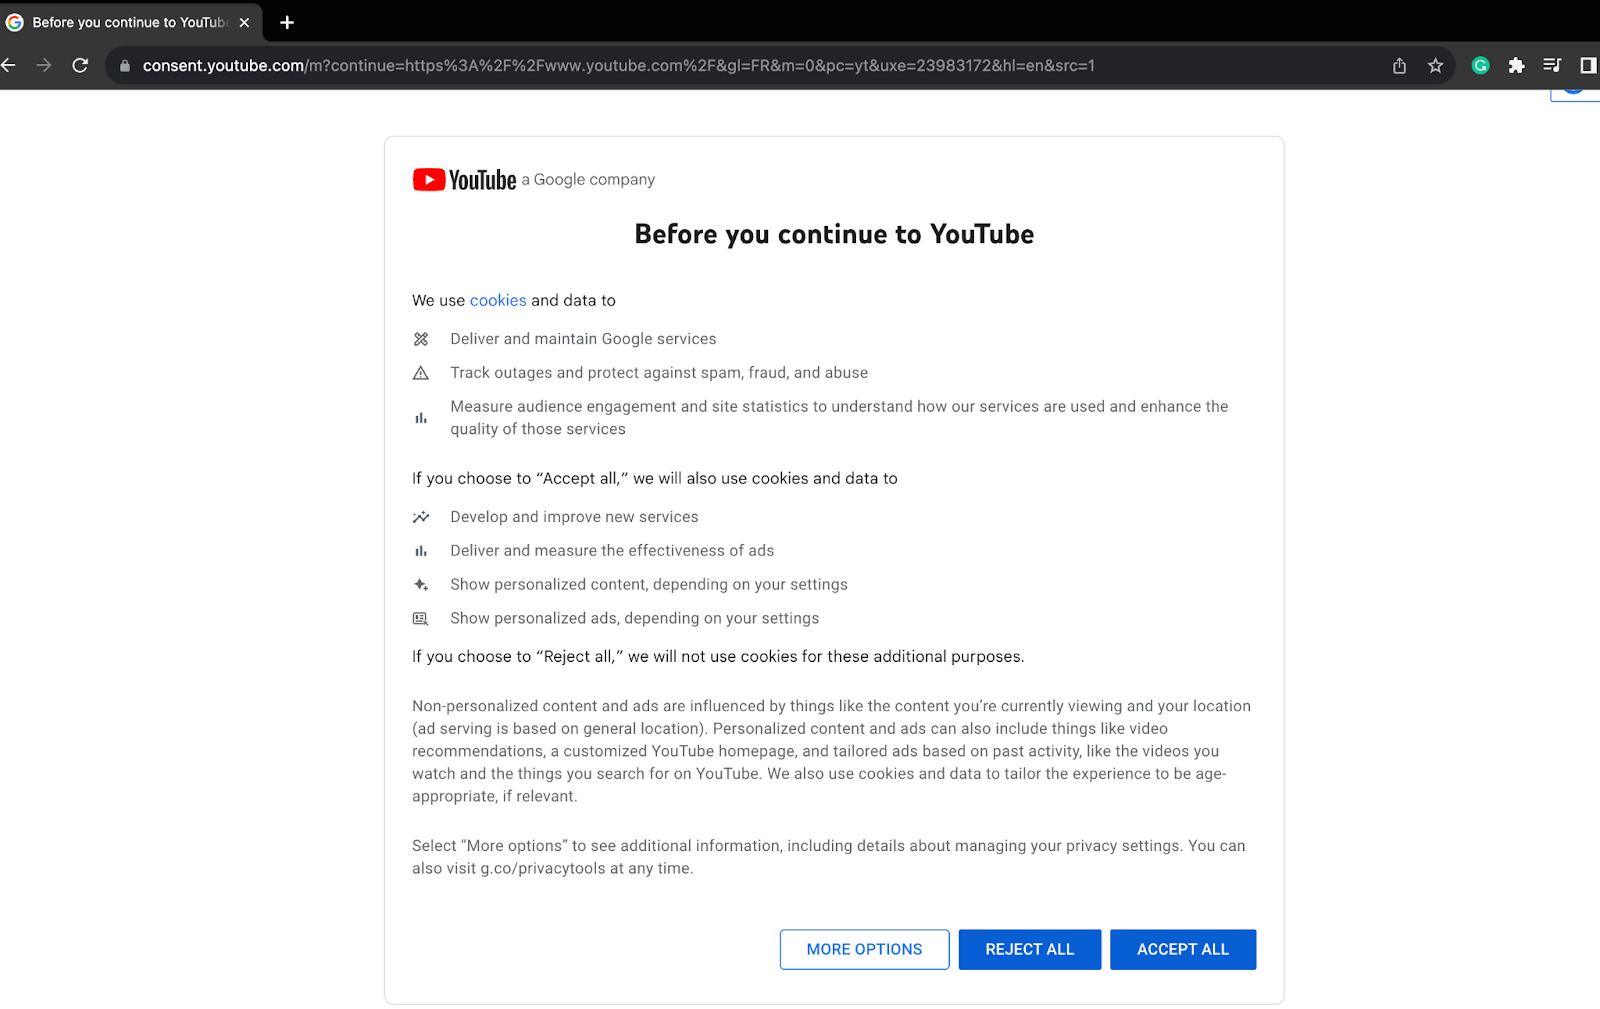  YouTube page scraping